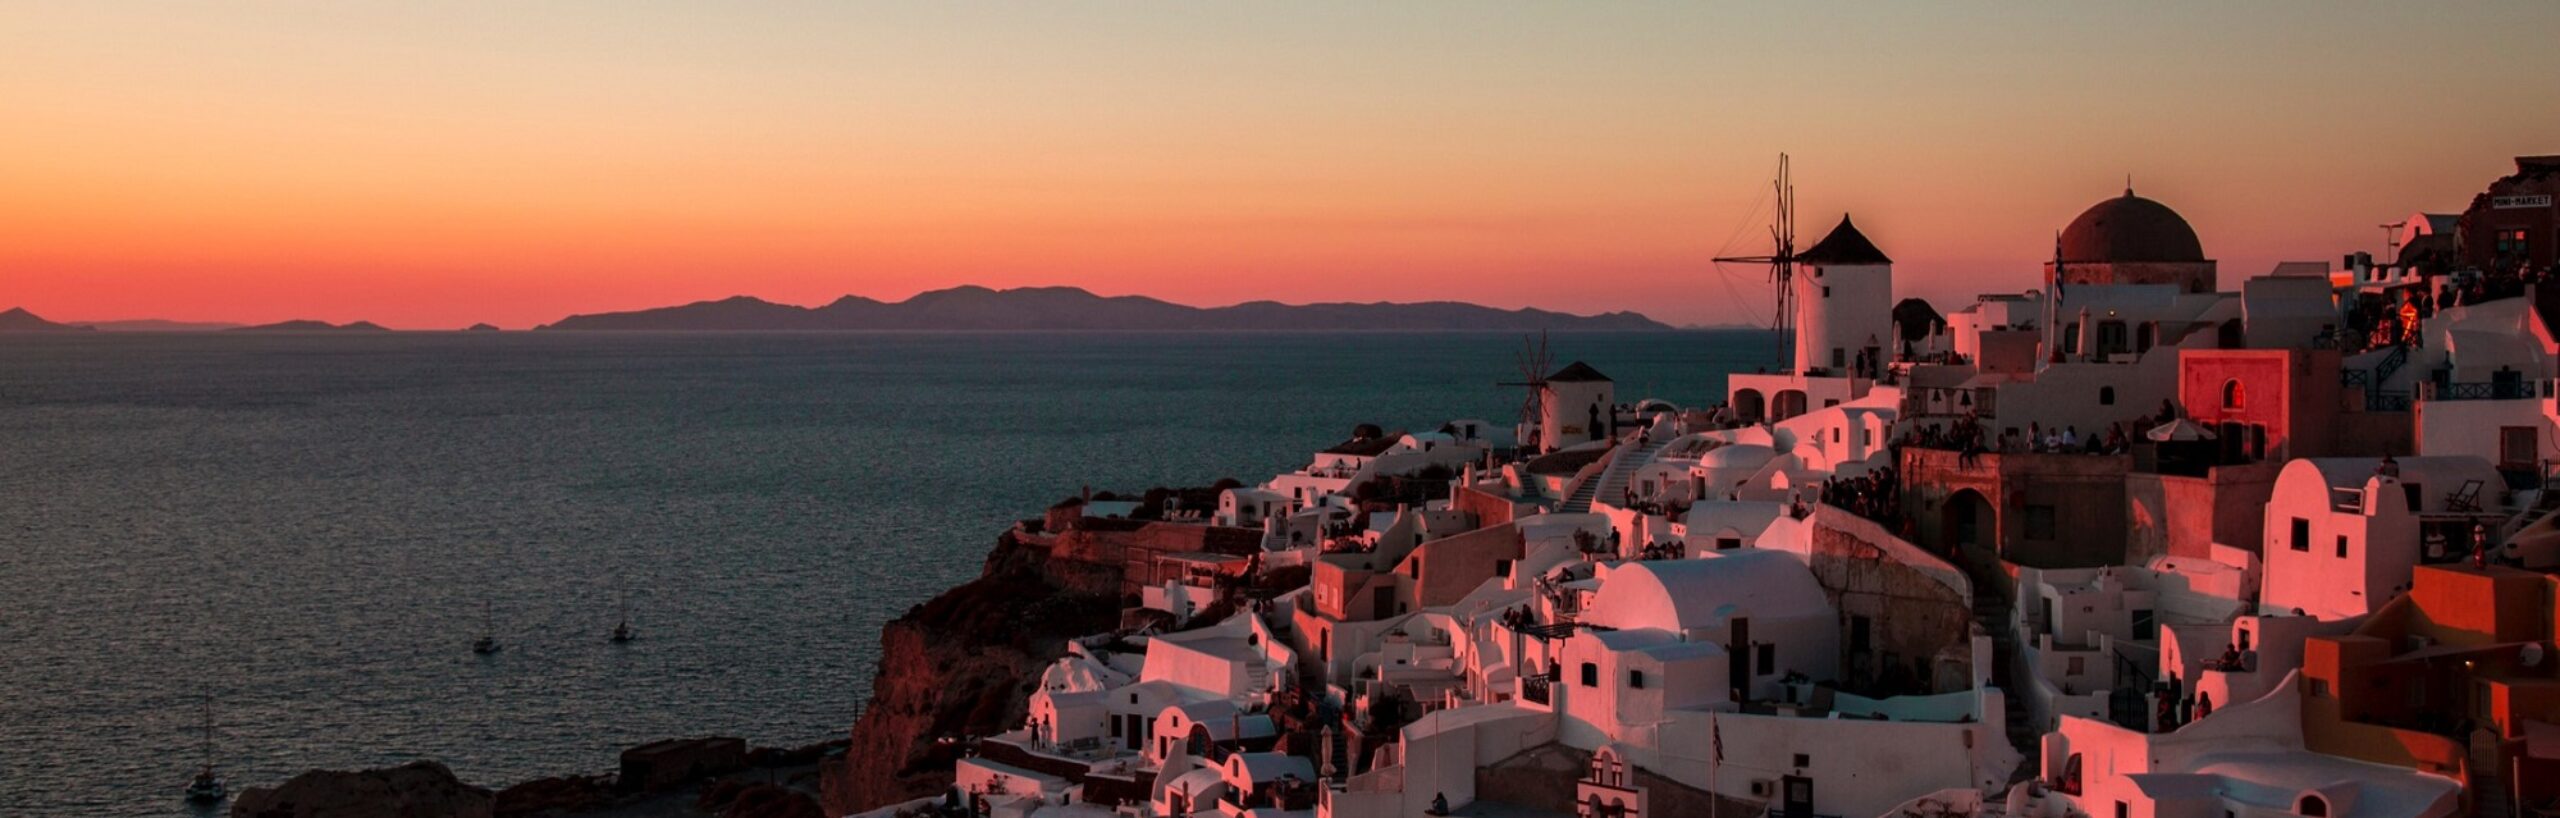 Sunset in Santorini: white buildings on the right bask in beautiful evening light, looking over the sea with land beyond